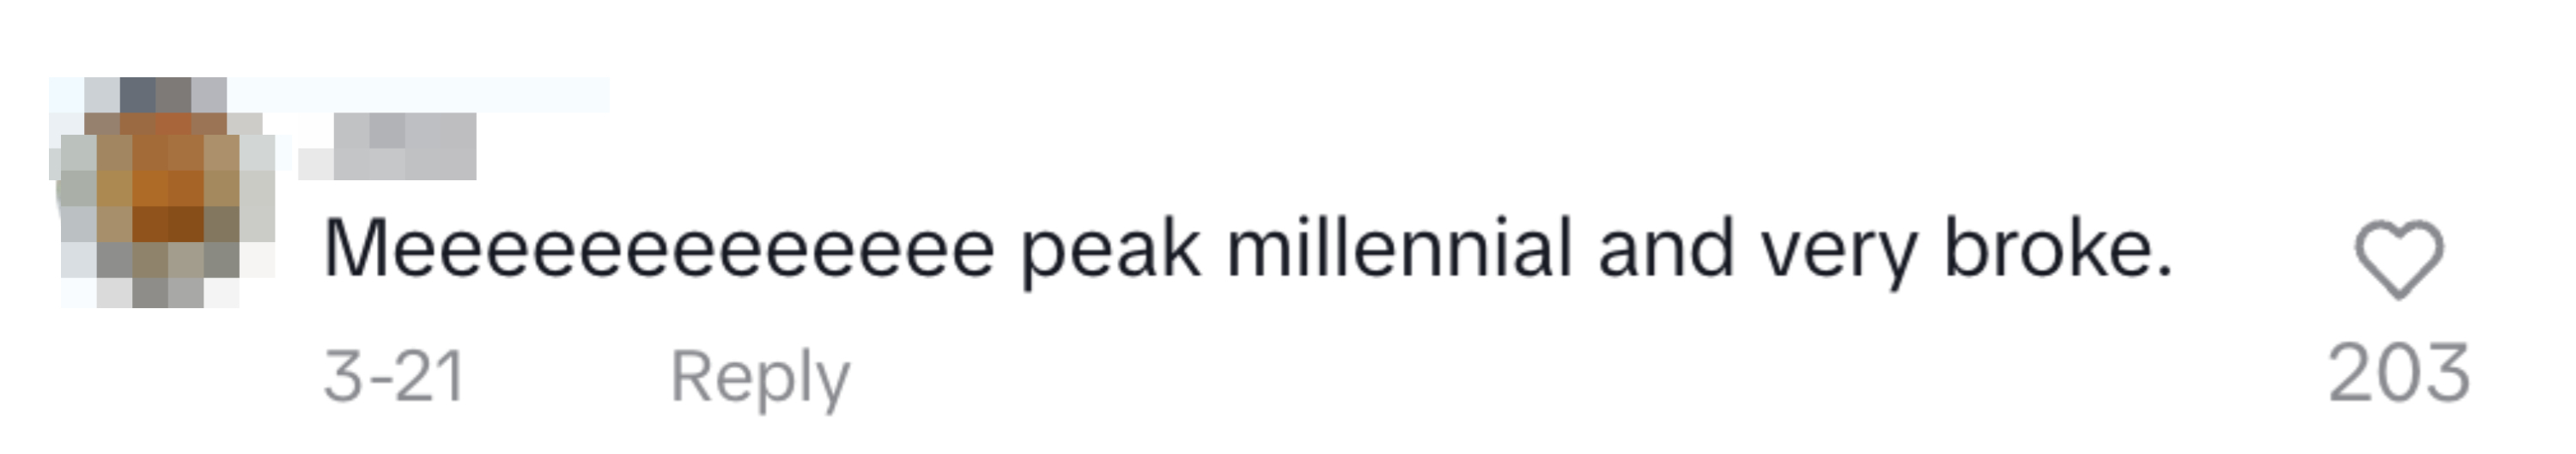 A comment that says &quot;Meeeeeeeeeeeee peak millennial and very broke.&quot; with a heart and 203 likes